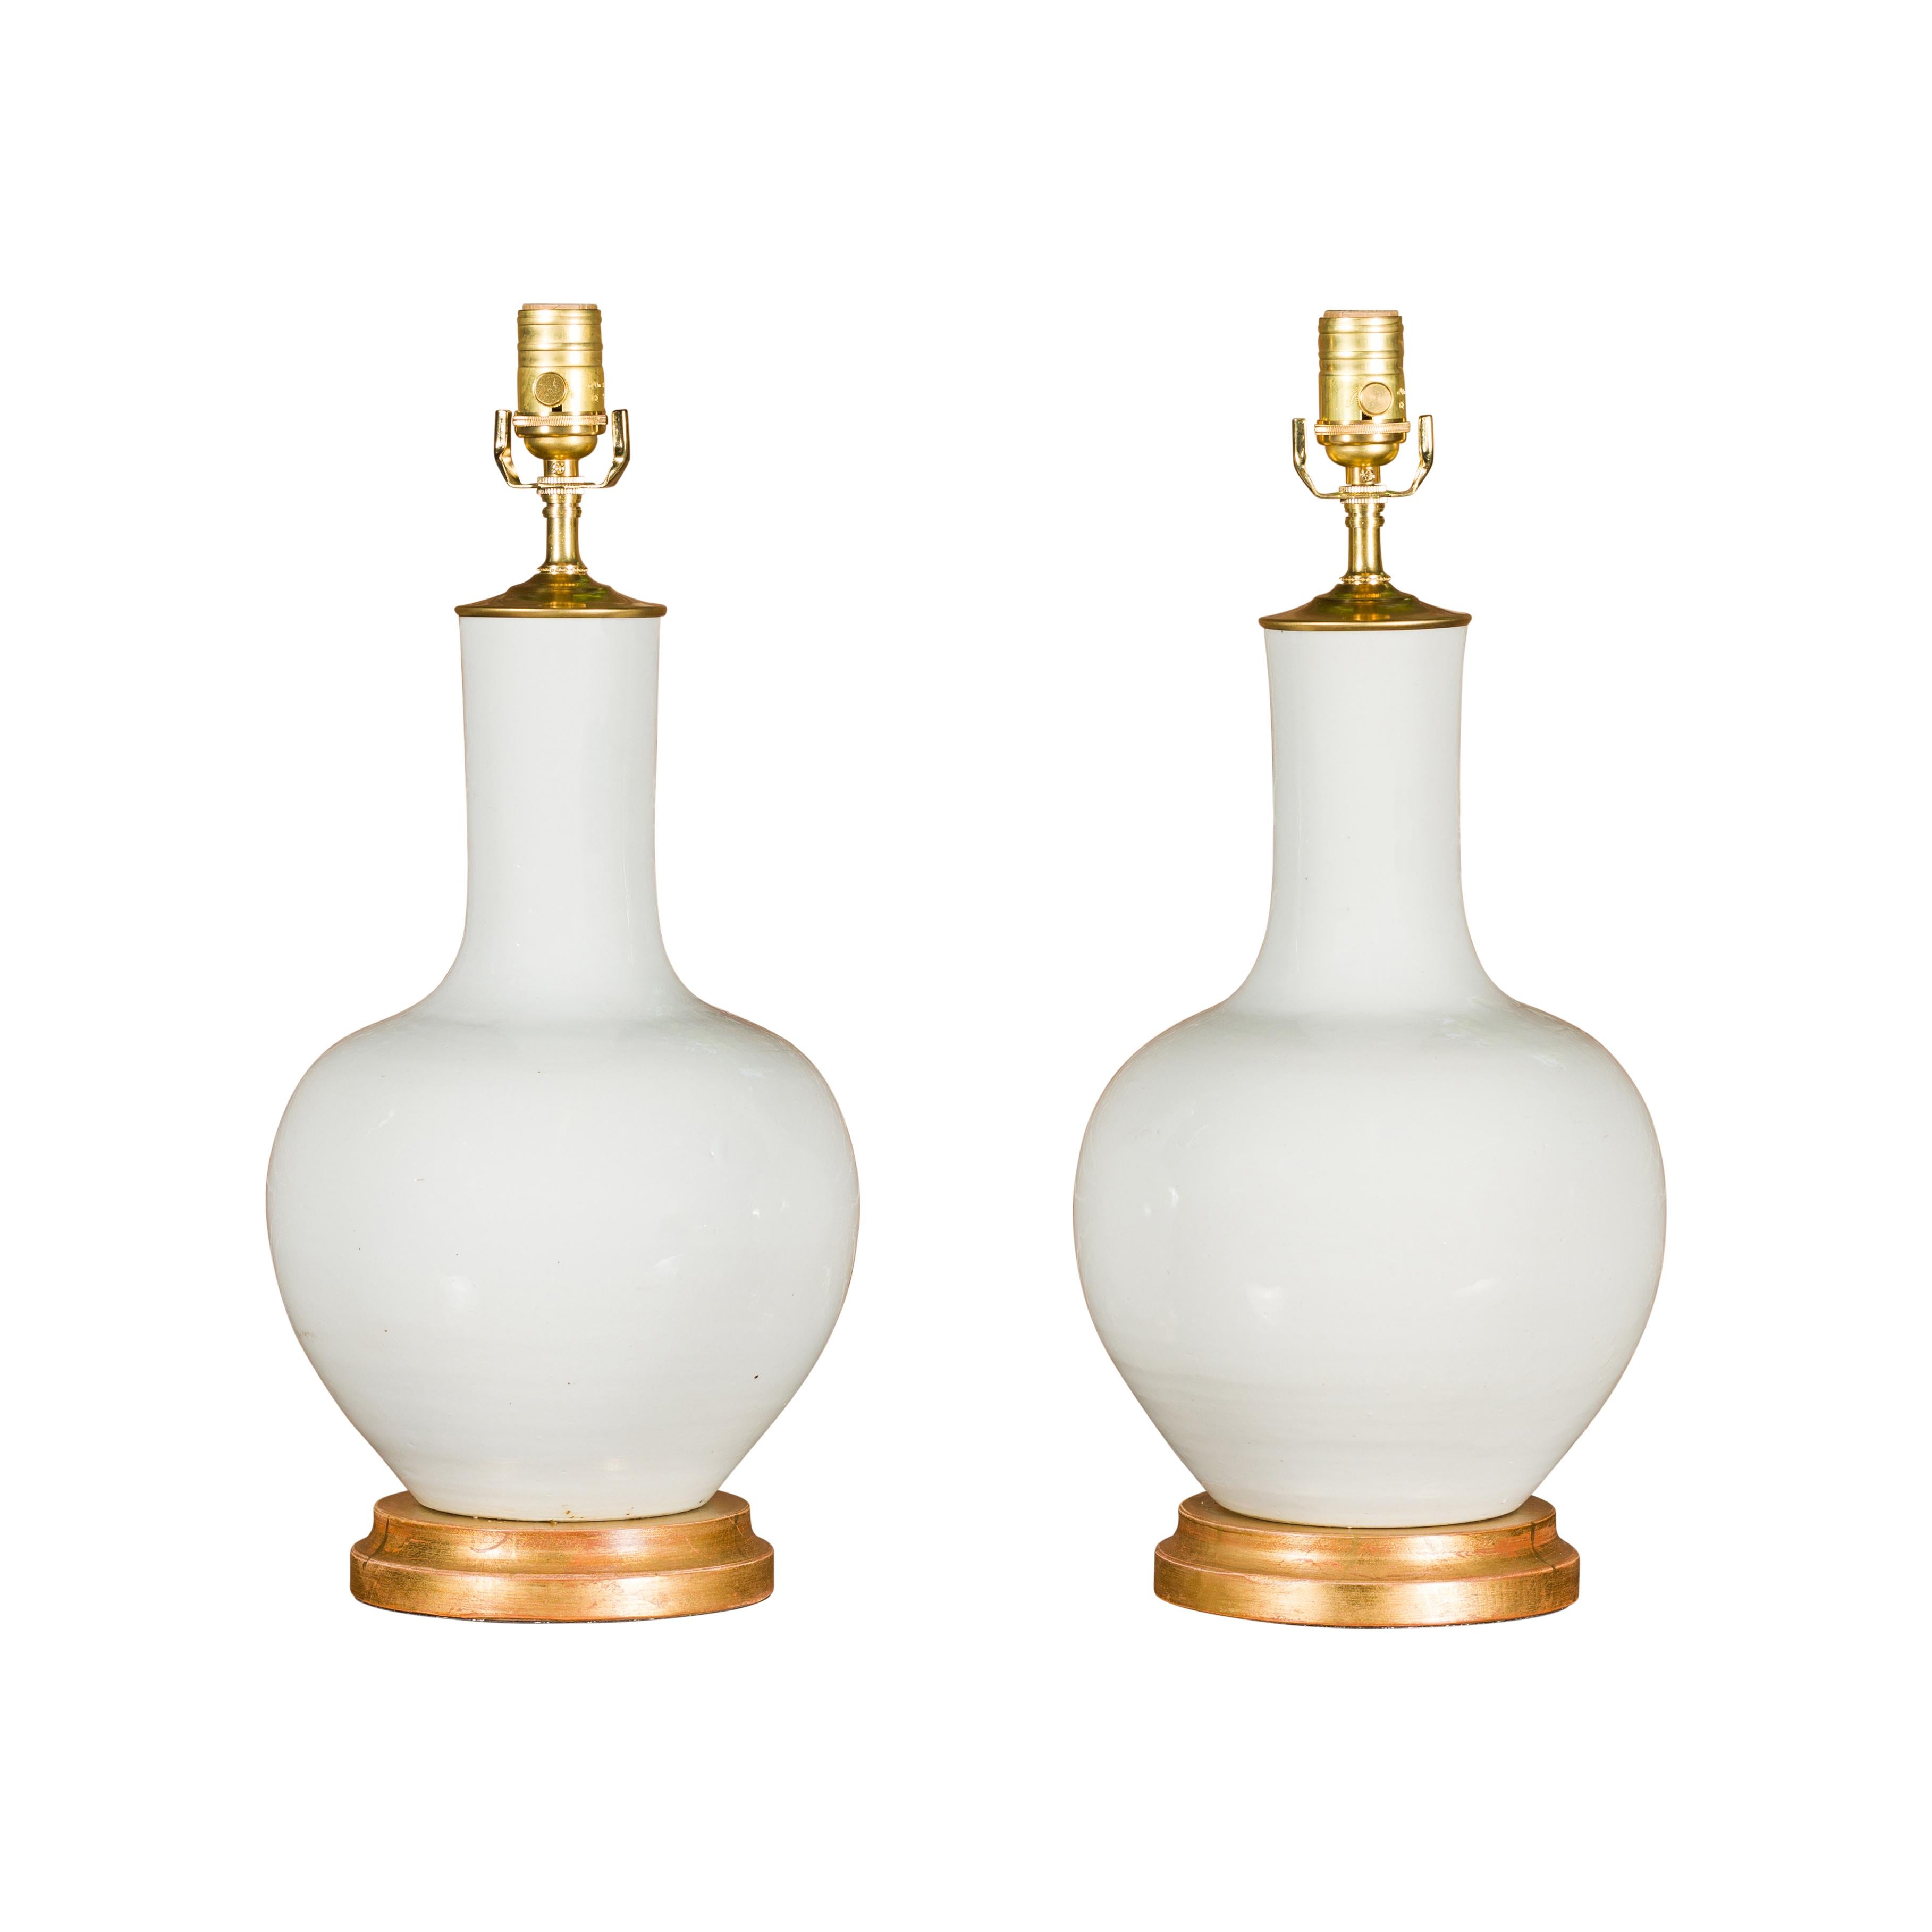 White Porcelain Vases Made into Wired Table Lamps on Giltwood Bases, a Pair For Sale 9